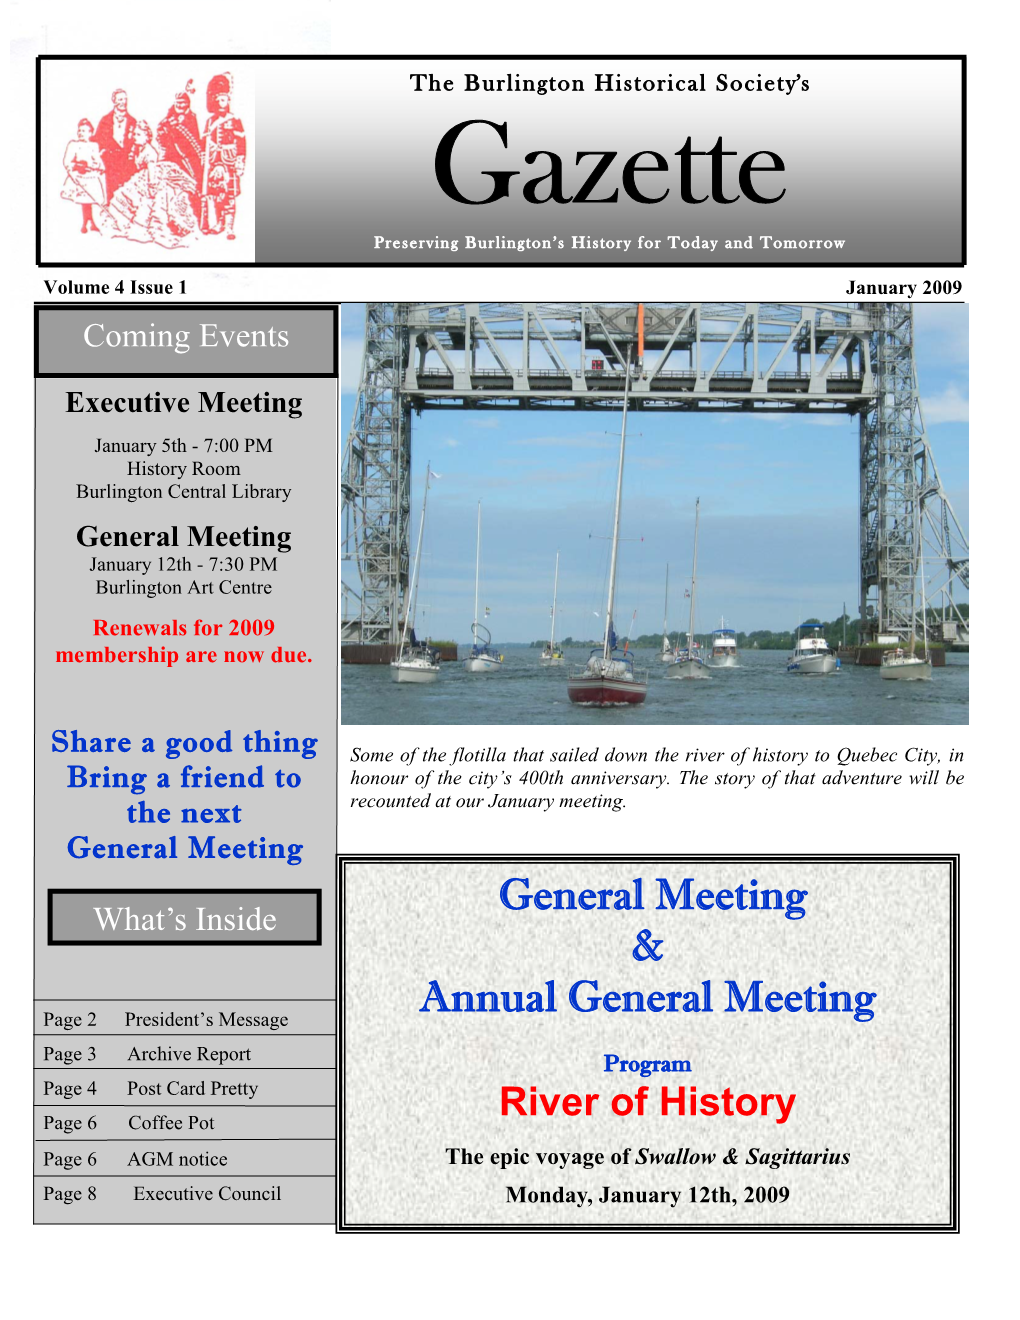 Gazette Preserving Burlington’S History for Today and Tomorrow